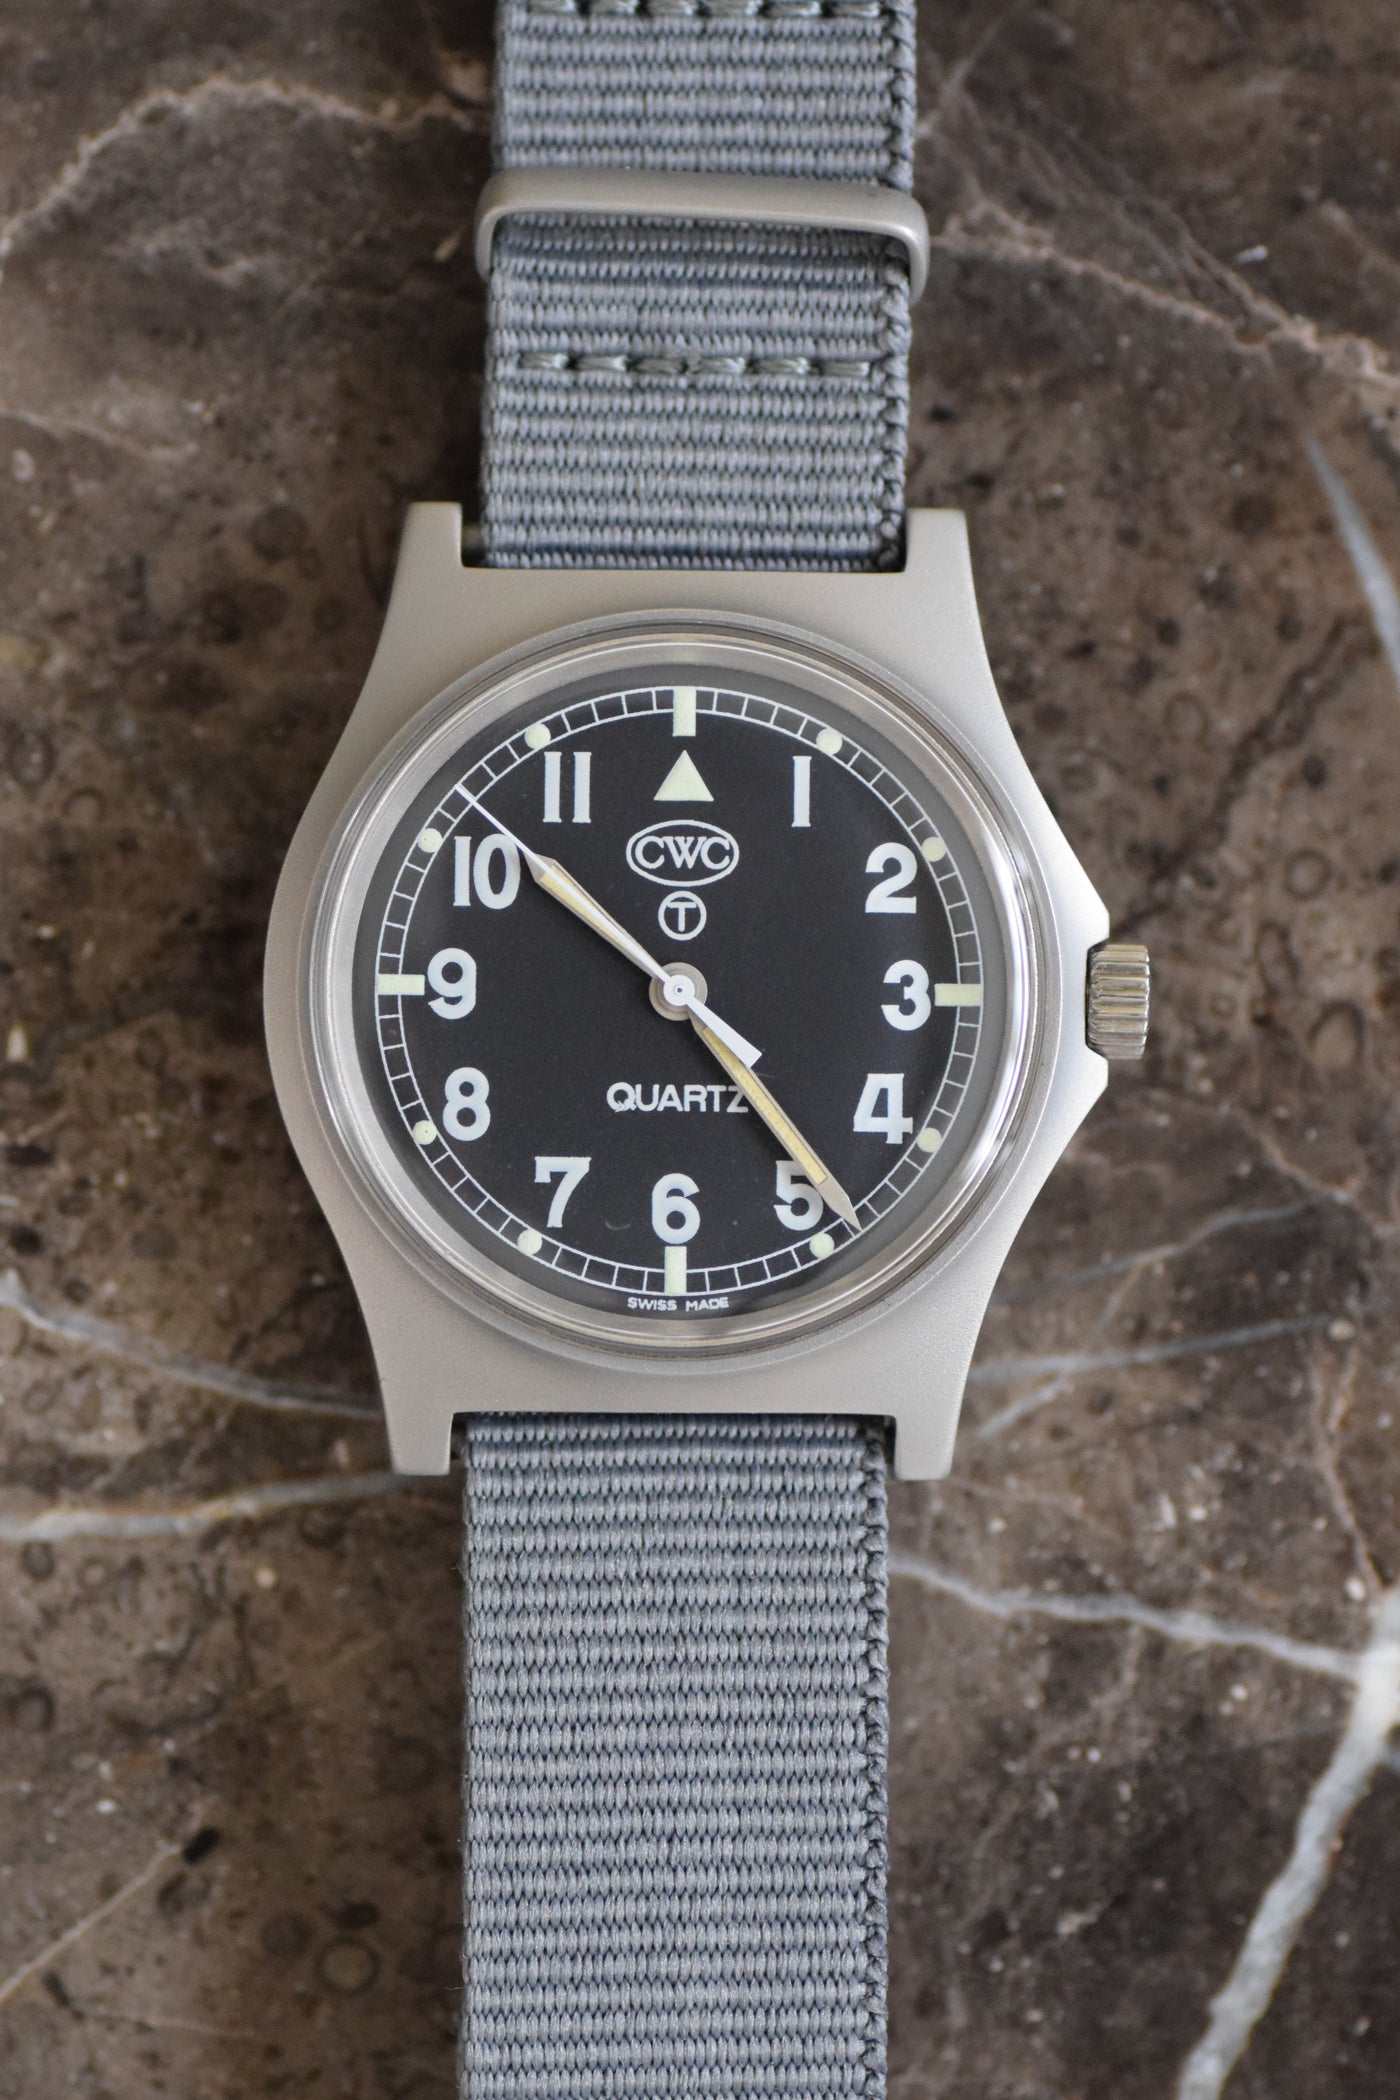 CWC Military Watch G10 British Military Watch 0552/6645-99 Quartz Cabot Watch Company Royal Navy Issue